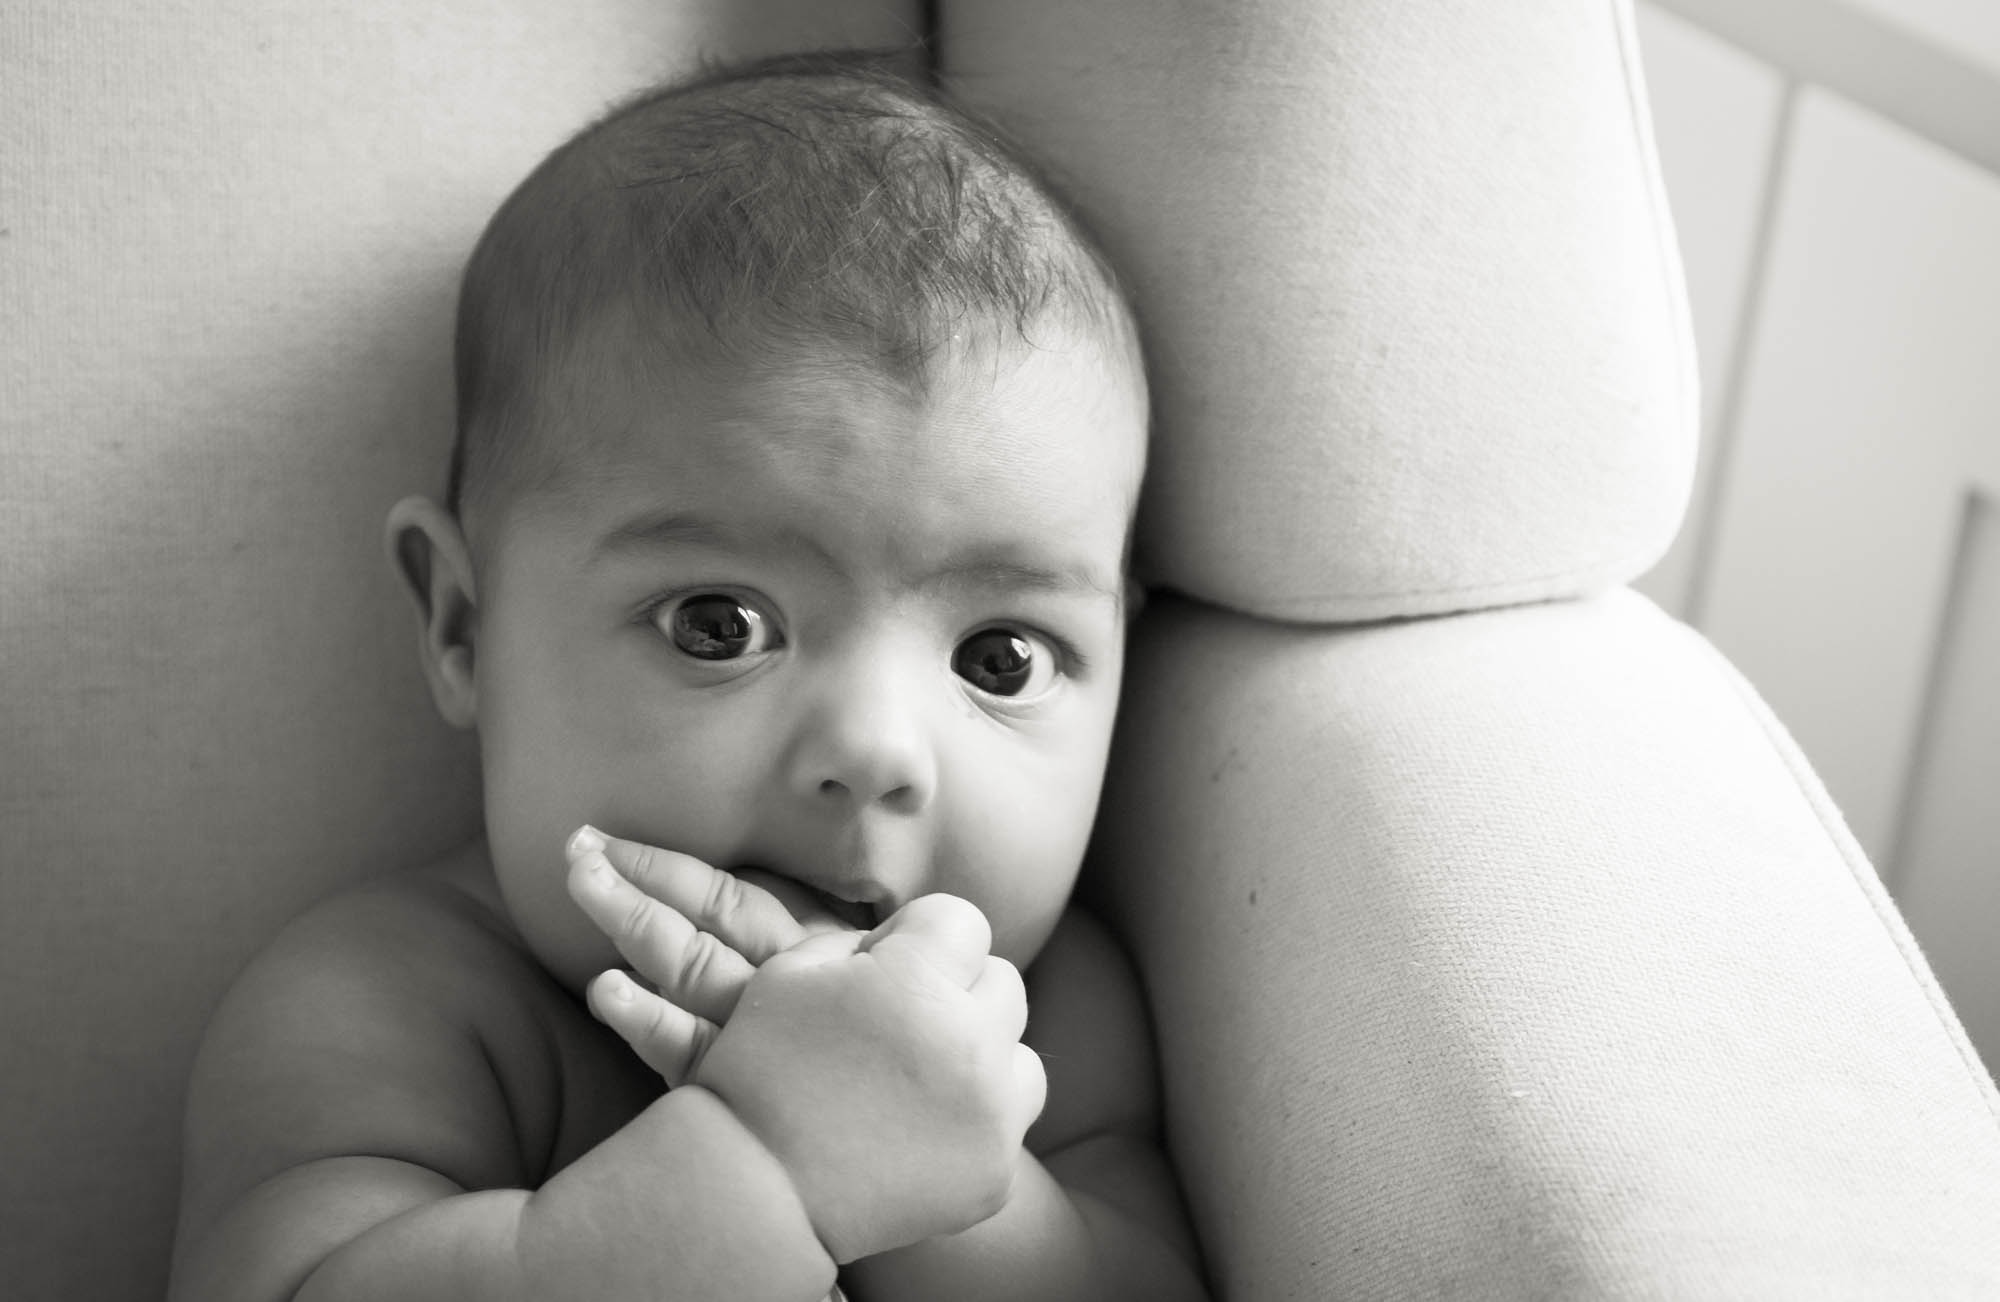 Black and white photo of baby with hands in mouth sitting in chair